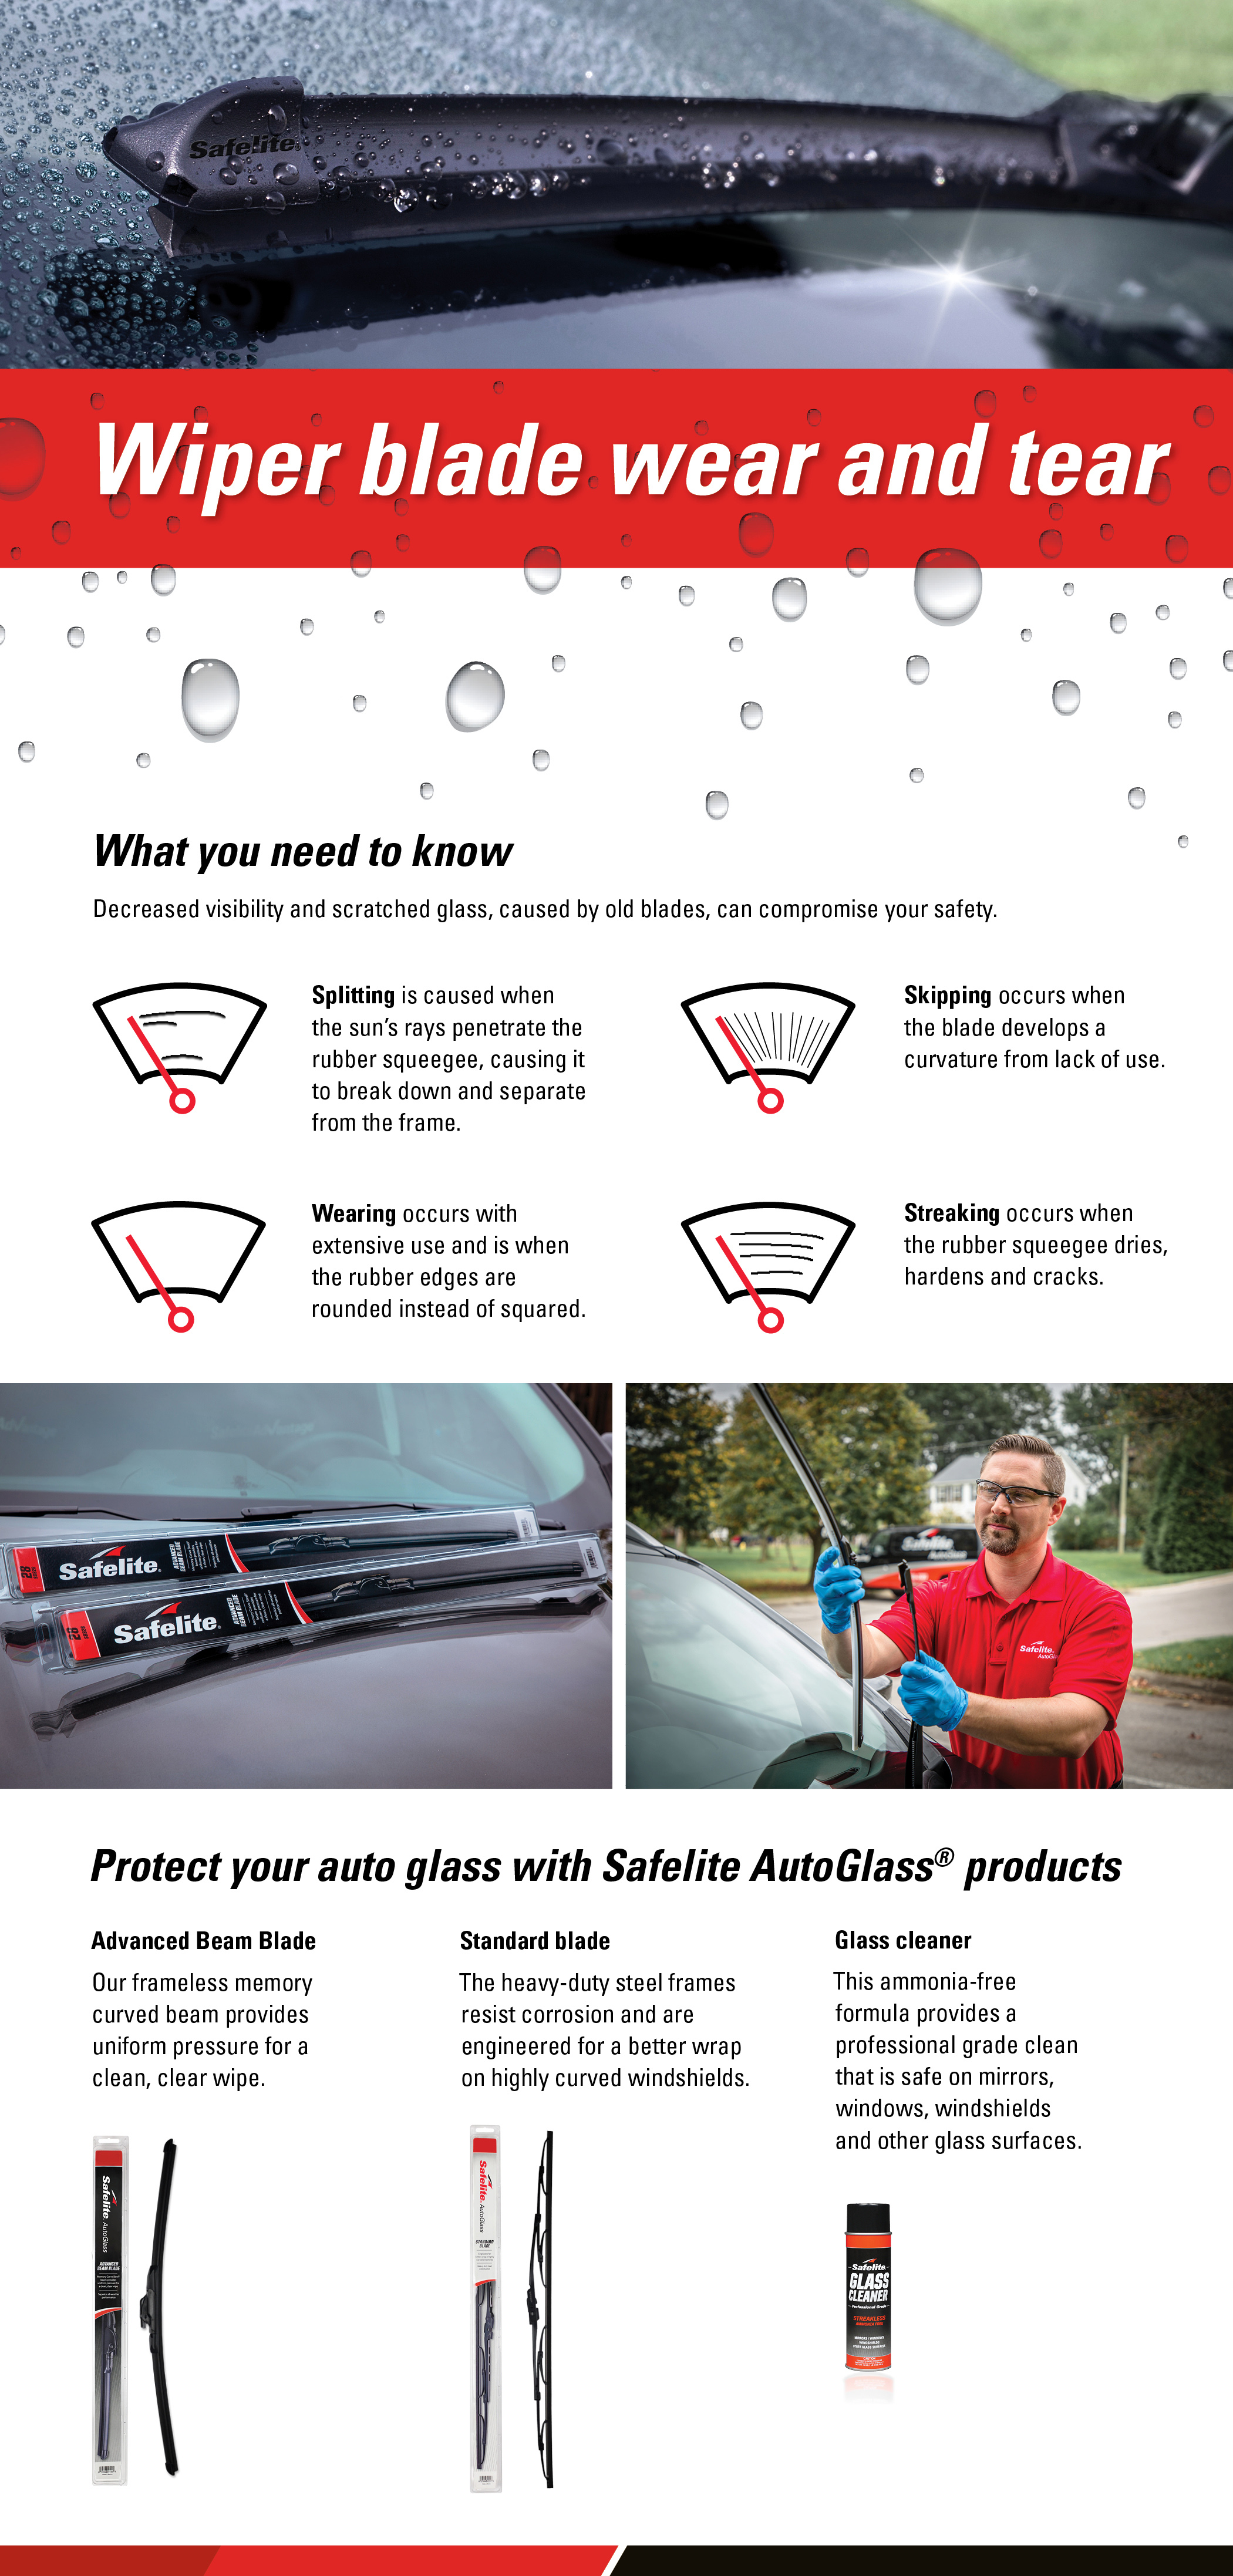 Splitting, skipping, wearing and streaking are all signs of wiper blade wear and tear. When you need new blades, protect your auto glass with Safelite wiper blades and glass cleaner.